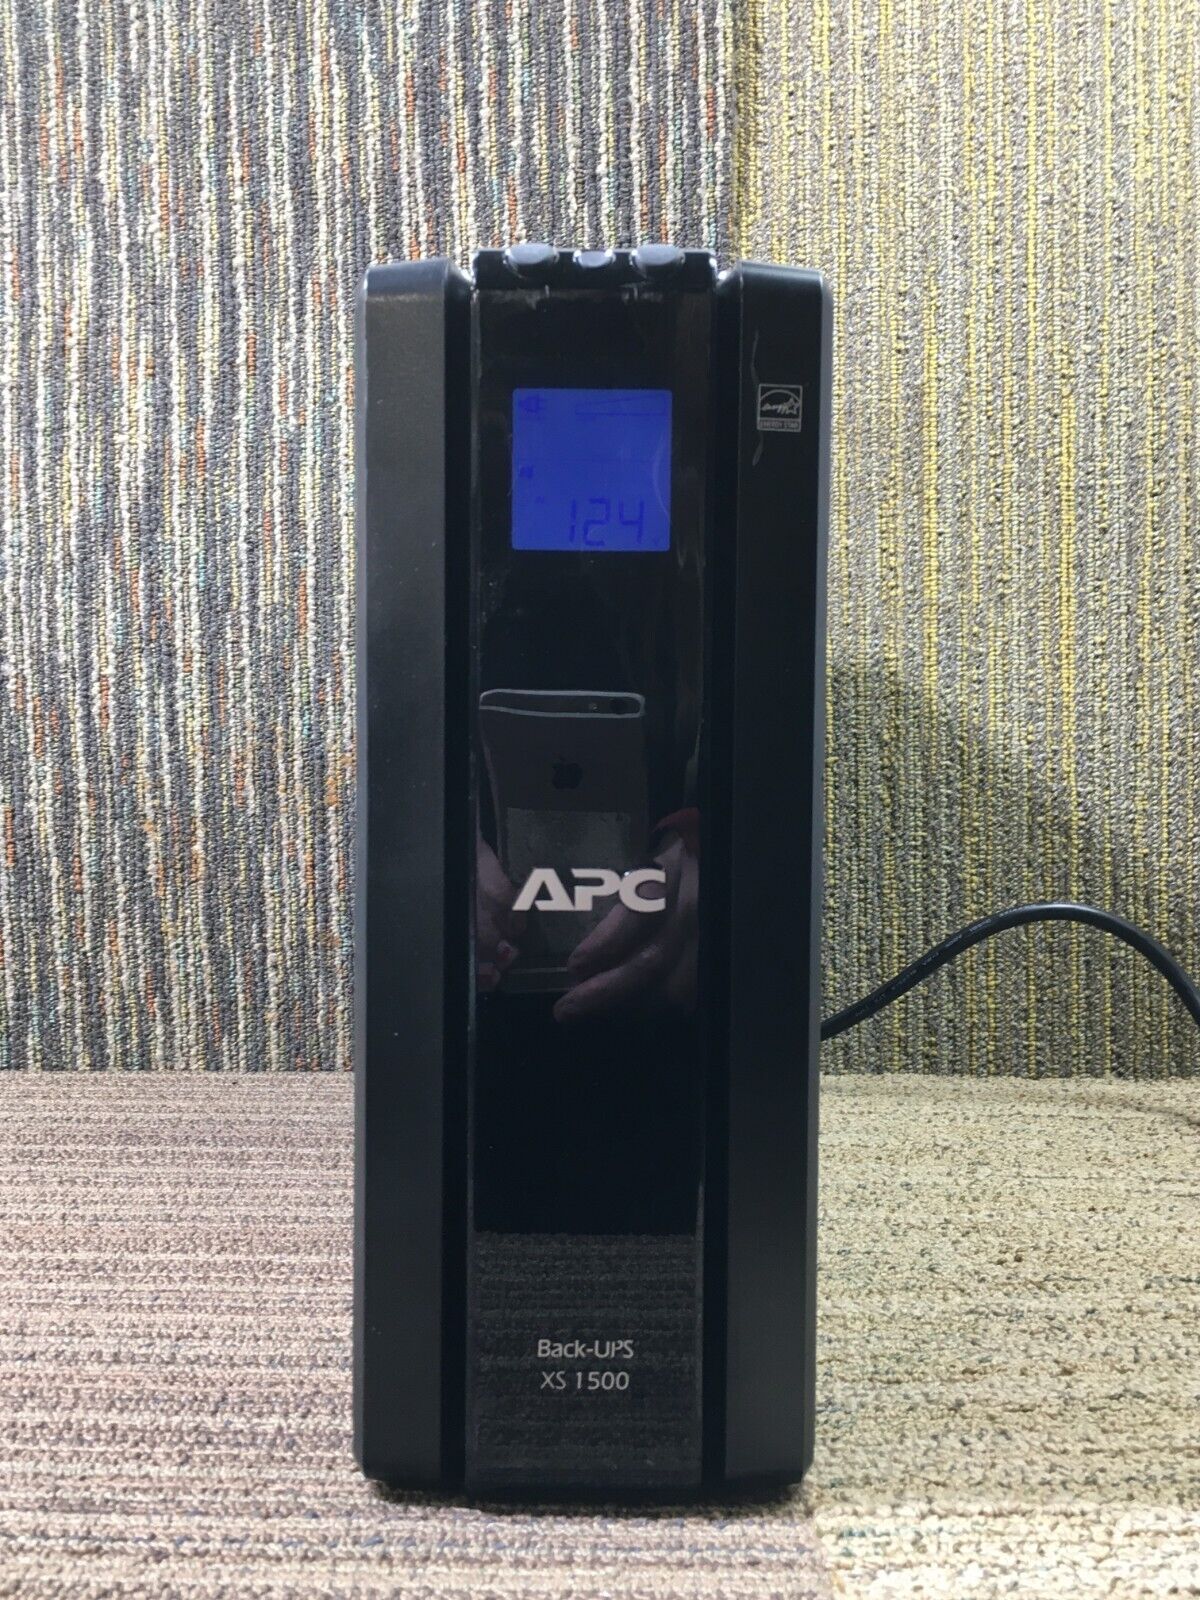 APC Back-UPS XS 1500 BX1500G 10 Outlets UPS WORKS NO BATTERY